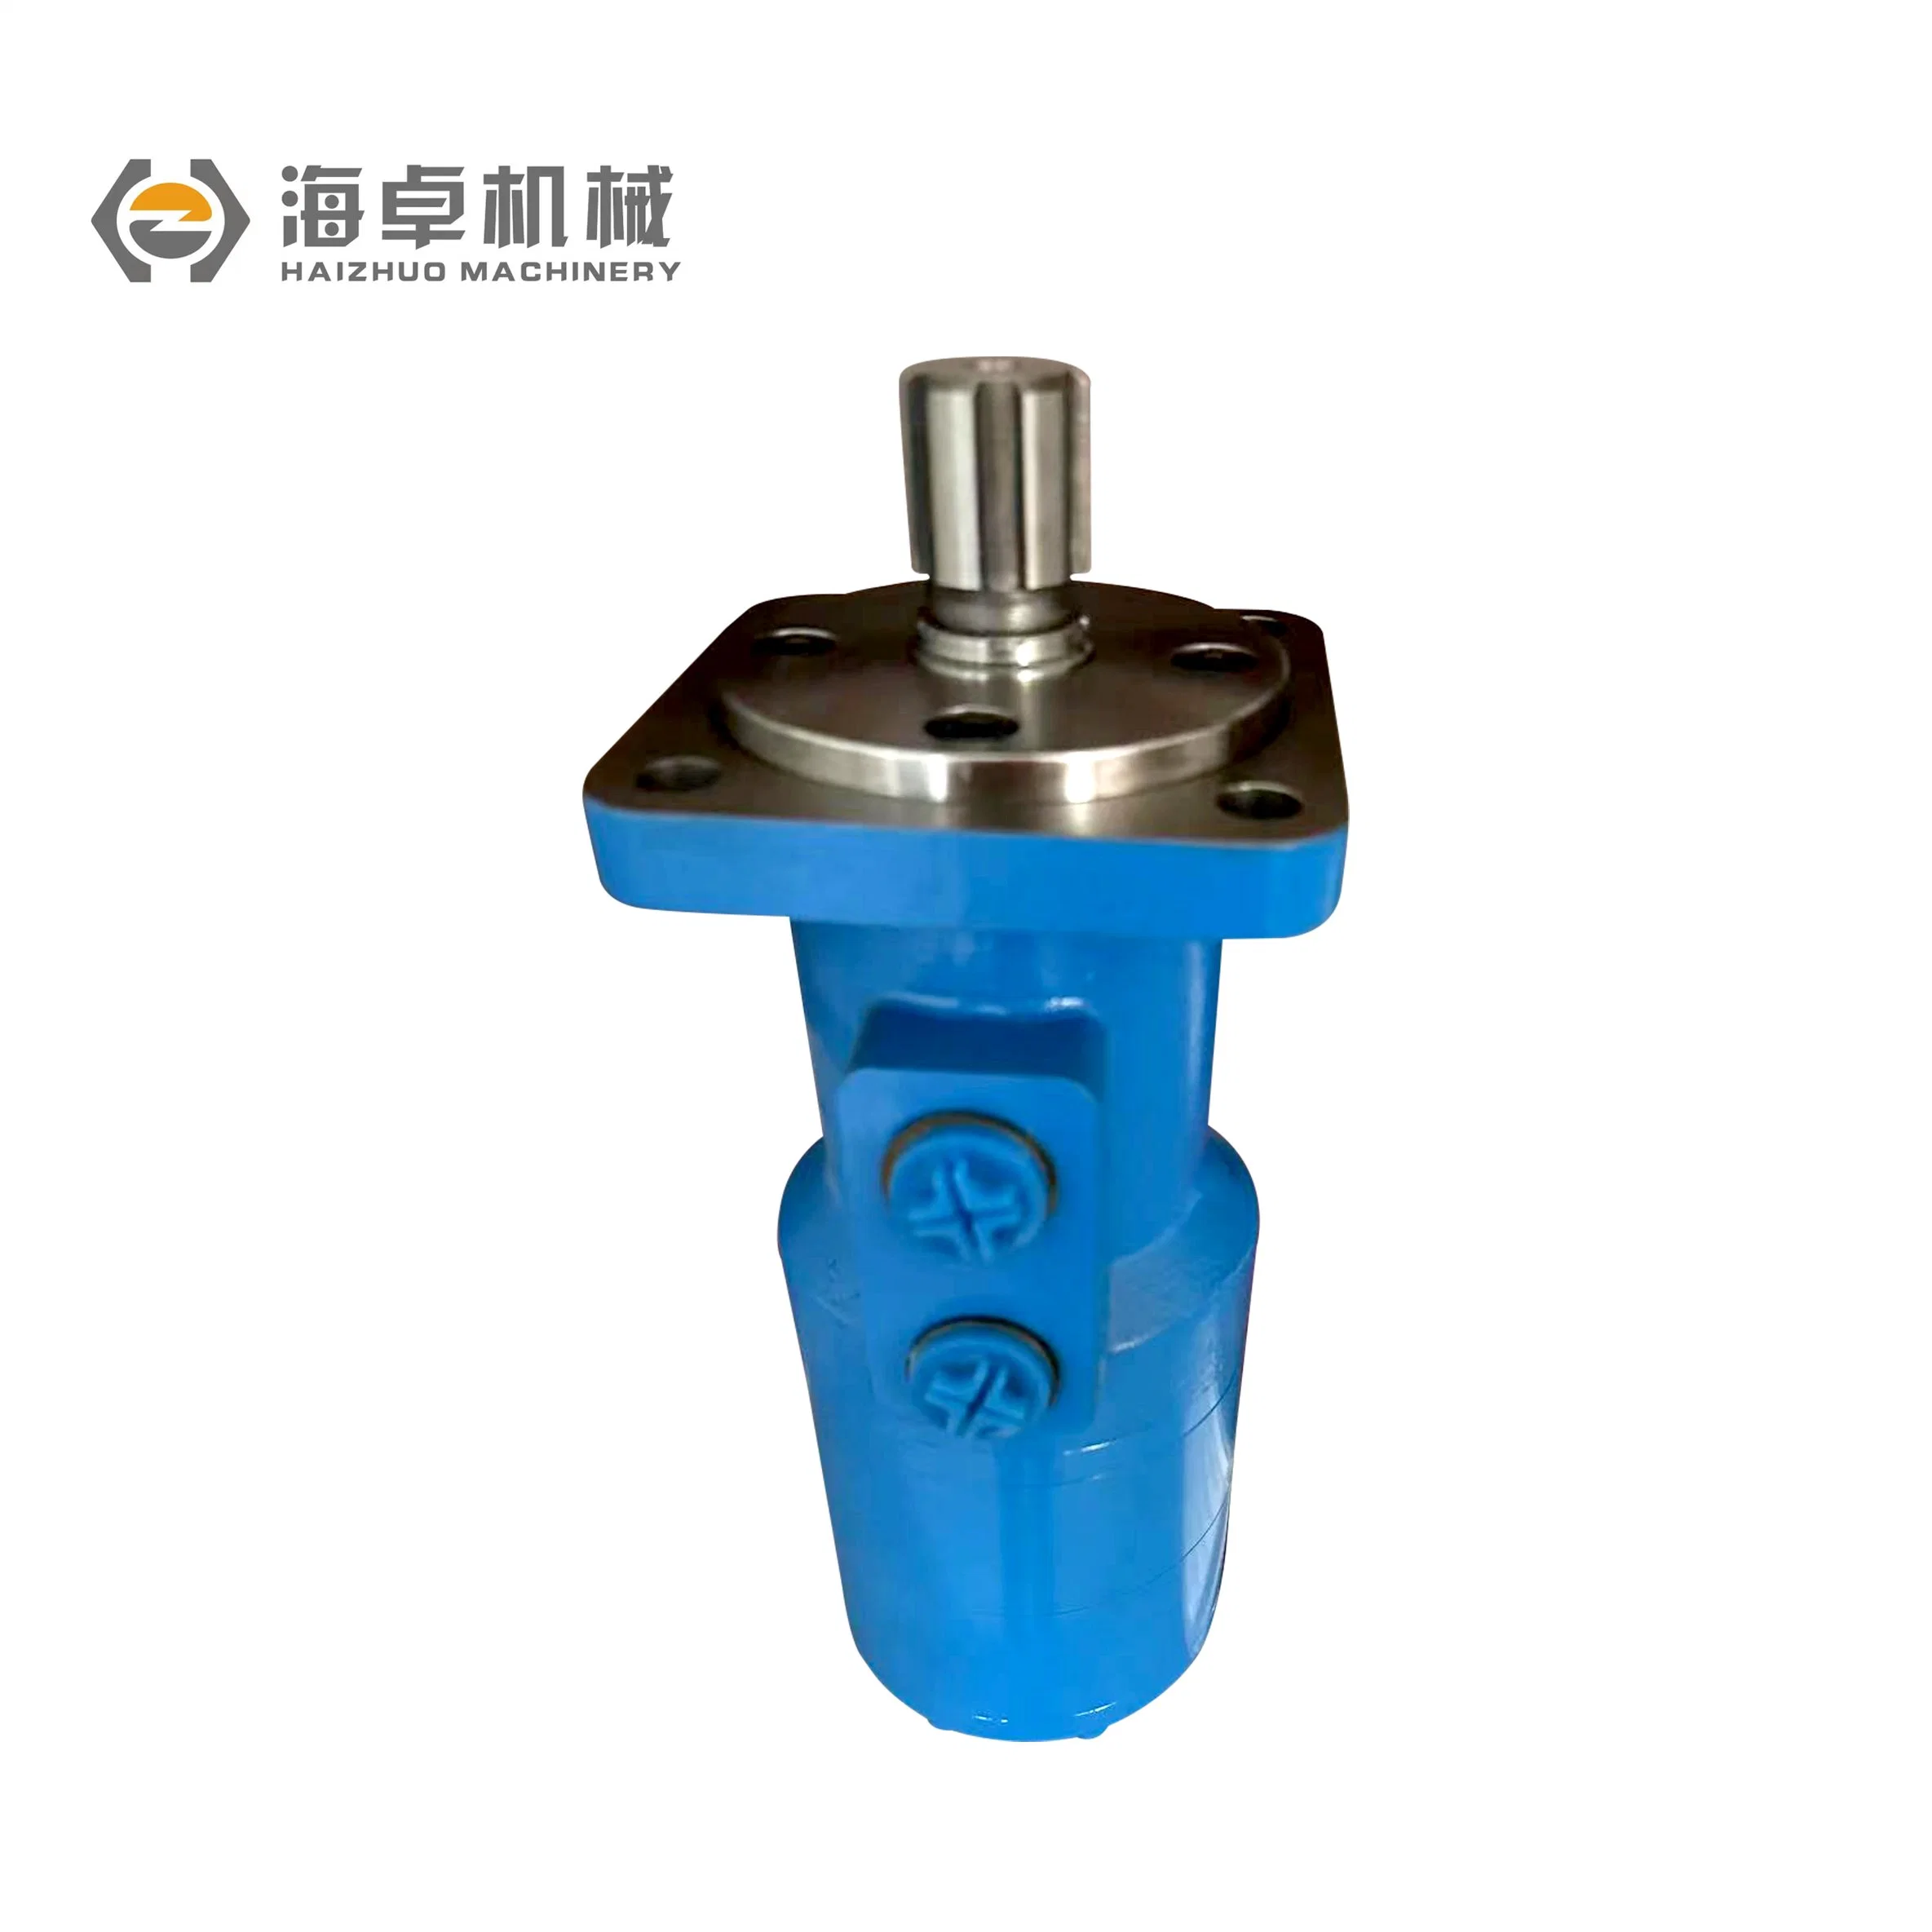 Bm3-305 Axial Flow Distribution or Configuration Hydraulic Orbit Motor Eaton Outer Connection Cycloid Motor for Pump Station or Other Independently Equipment